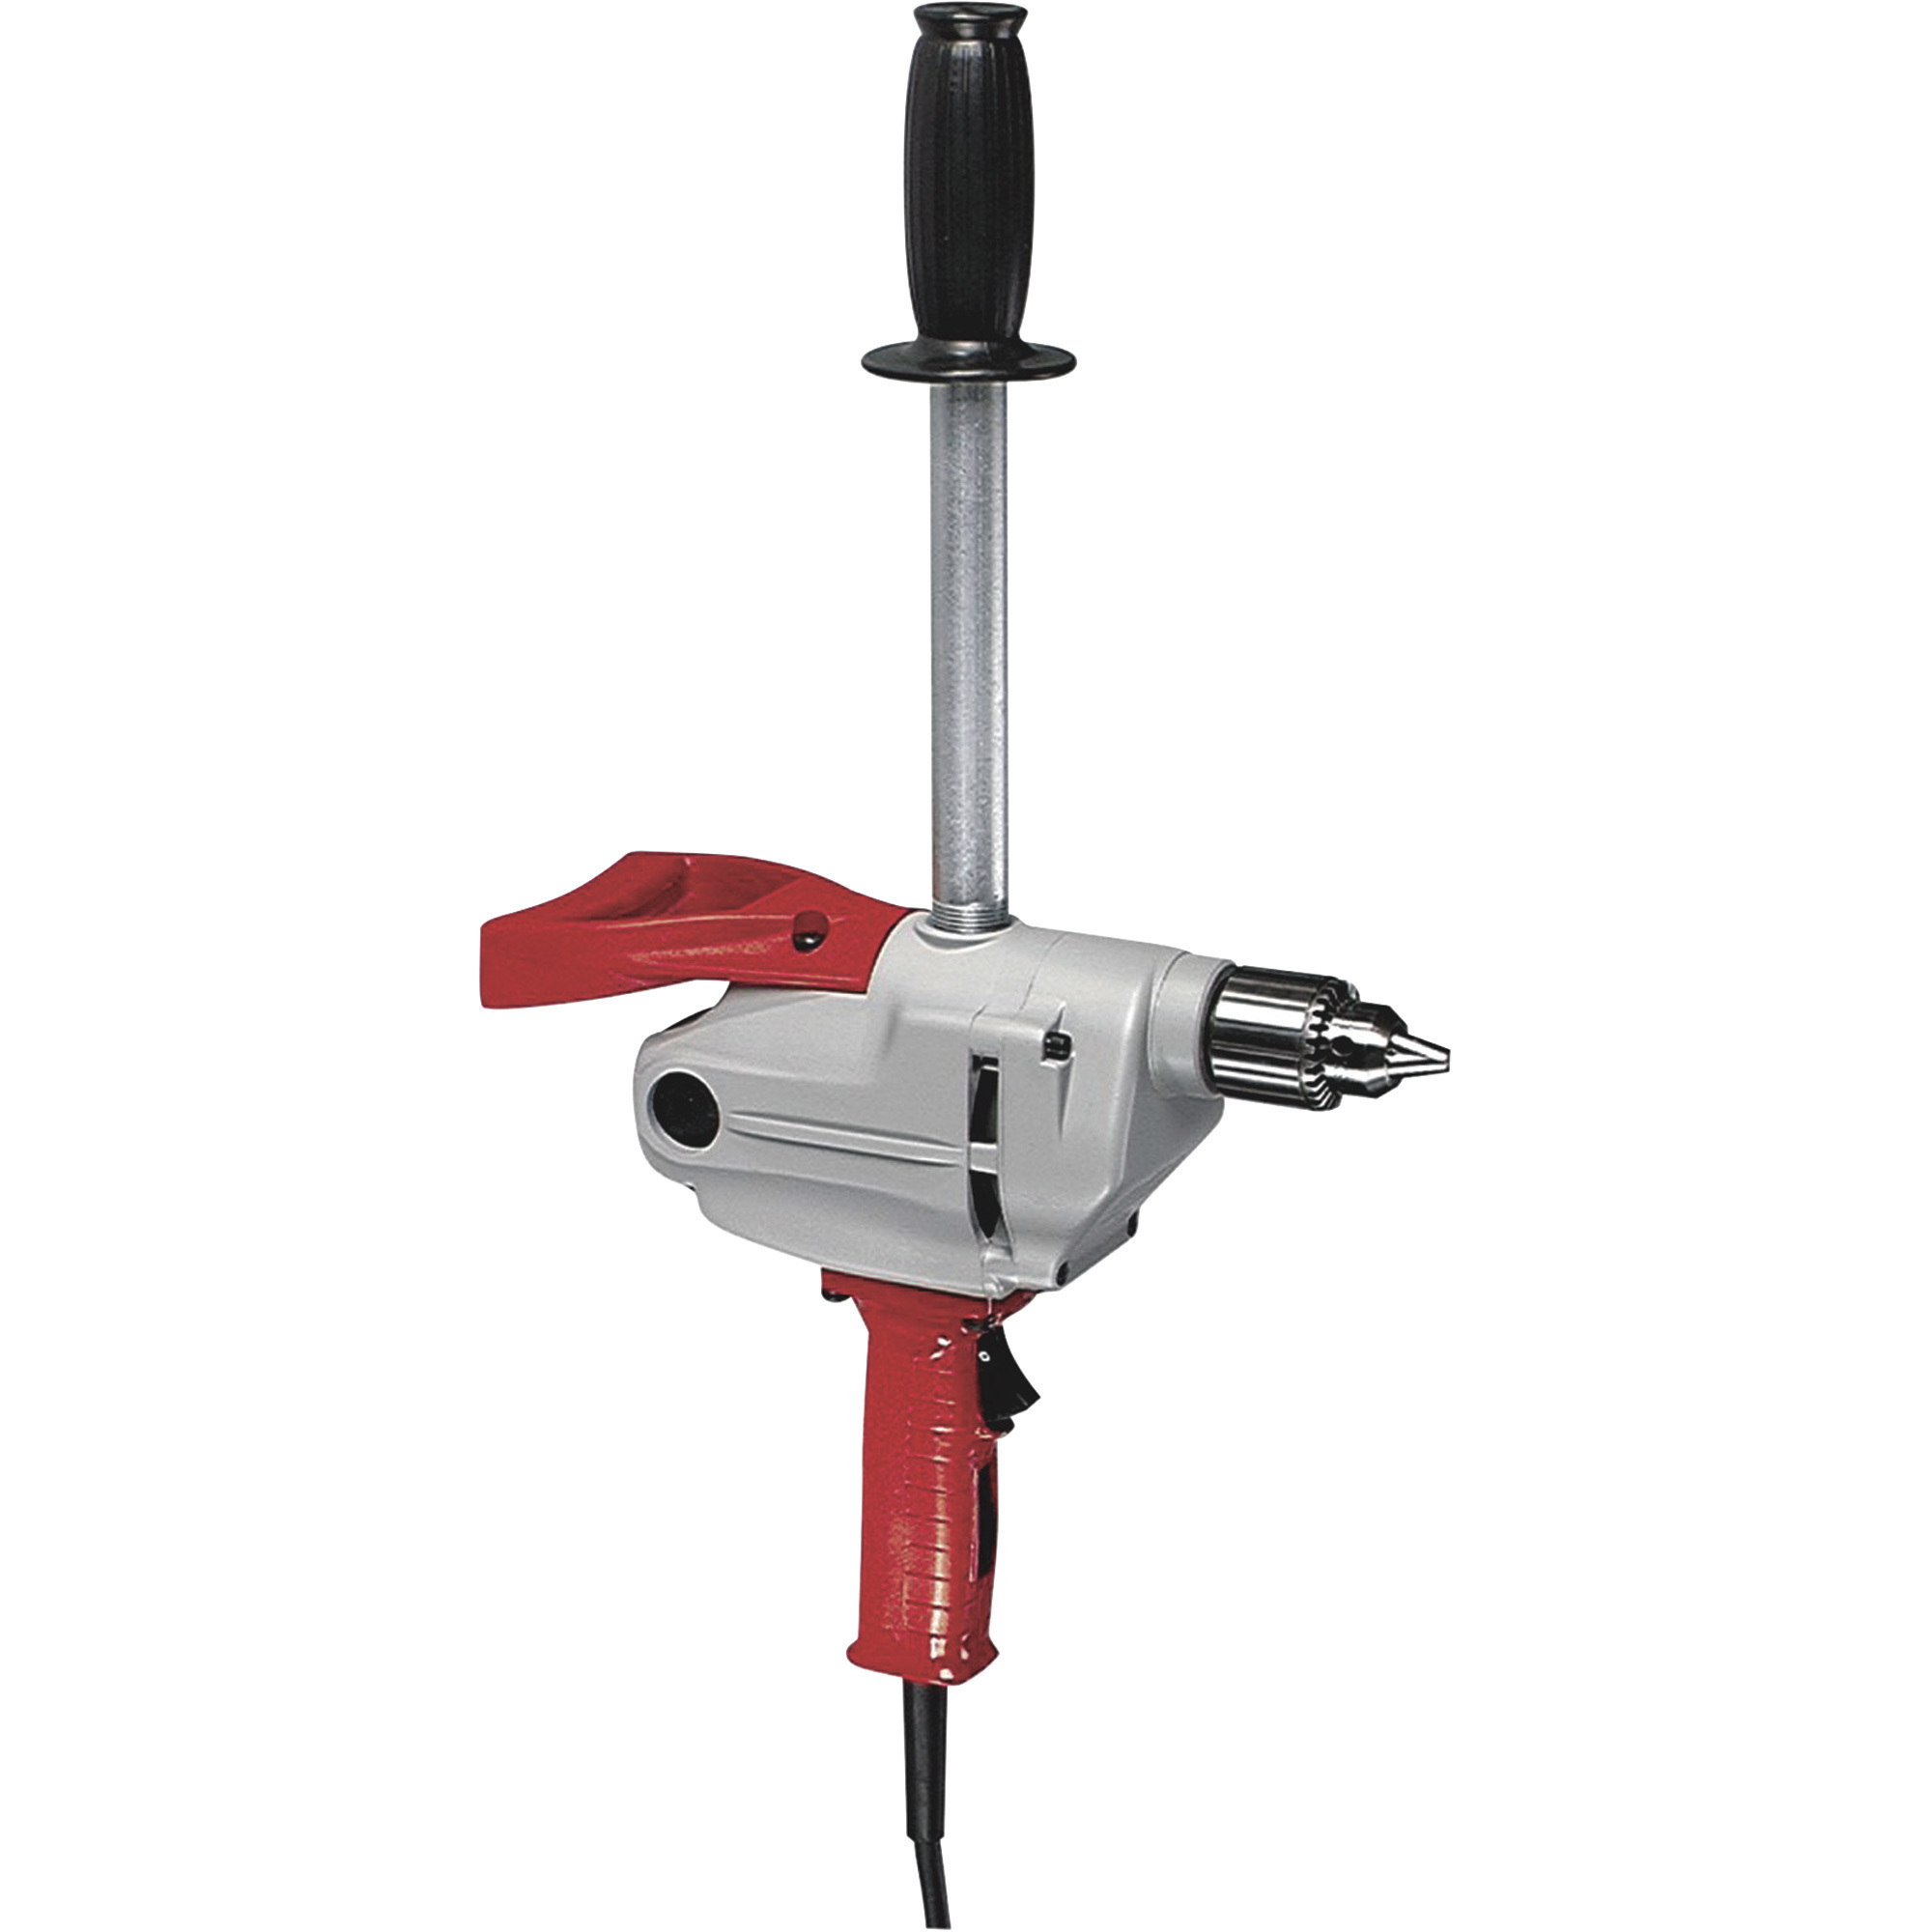 Milwaukee Corded Electric Spade Handle Drill With Pipe Handle, 1/2Inch Chuck, 7.0 Amp, 450 RPM, Model 1660-6